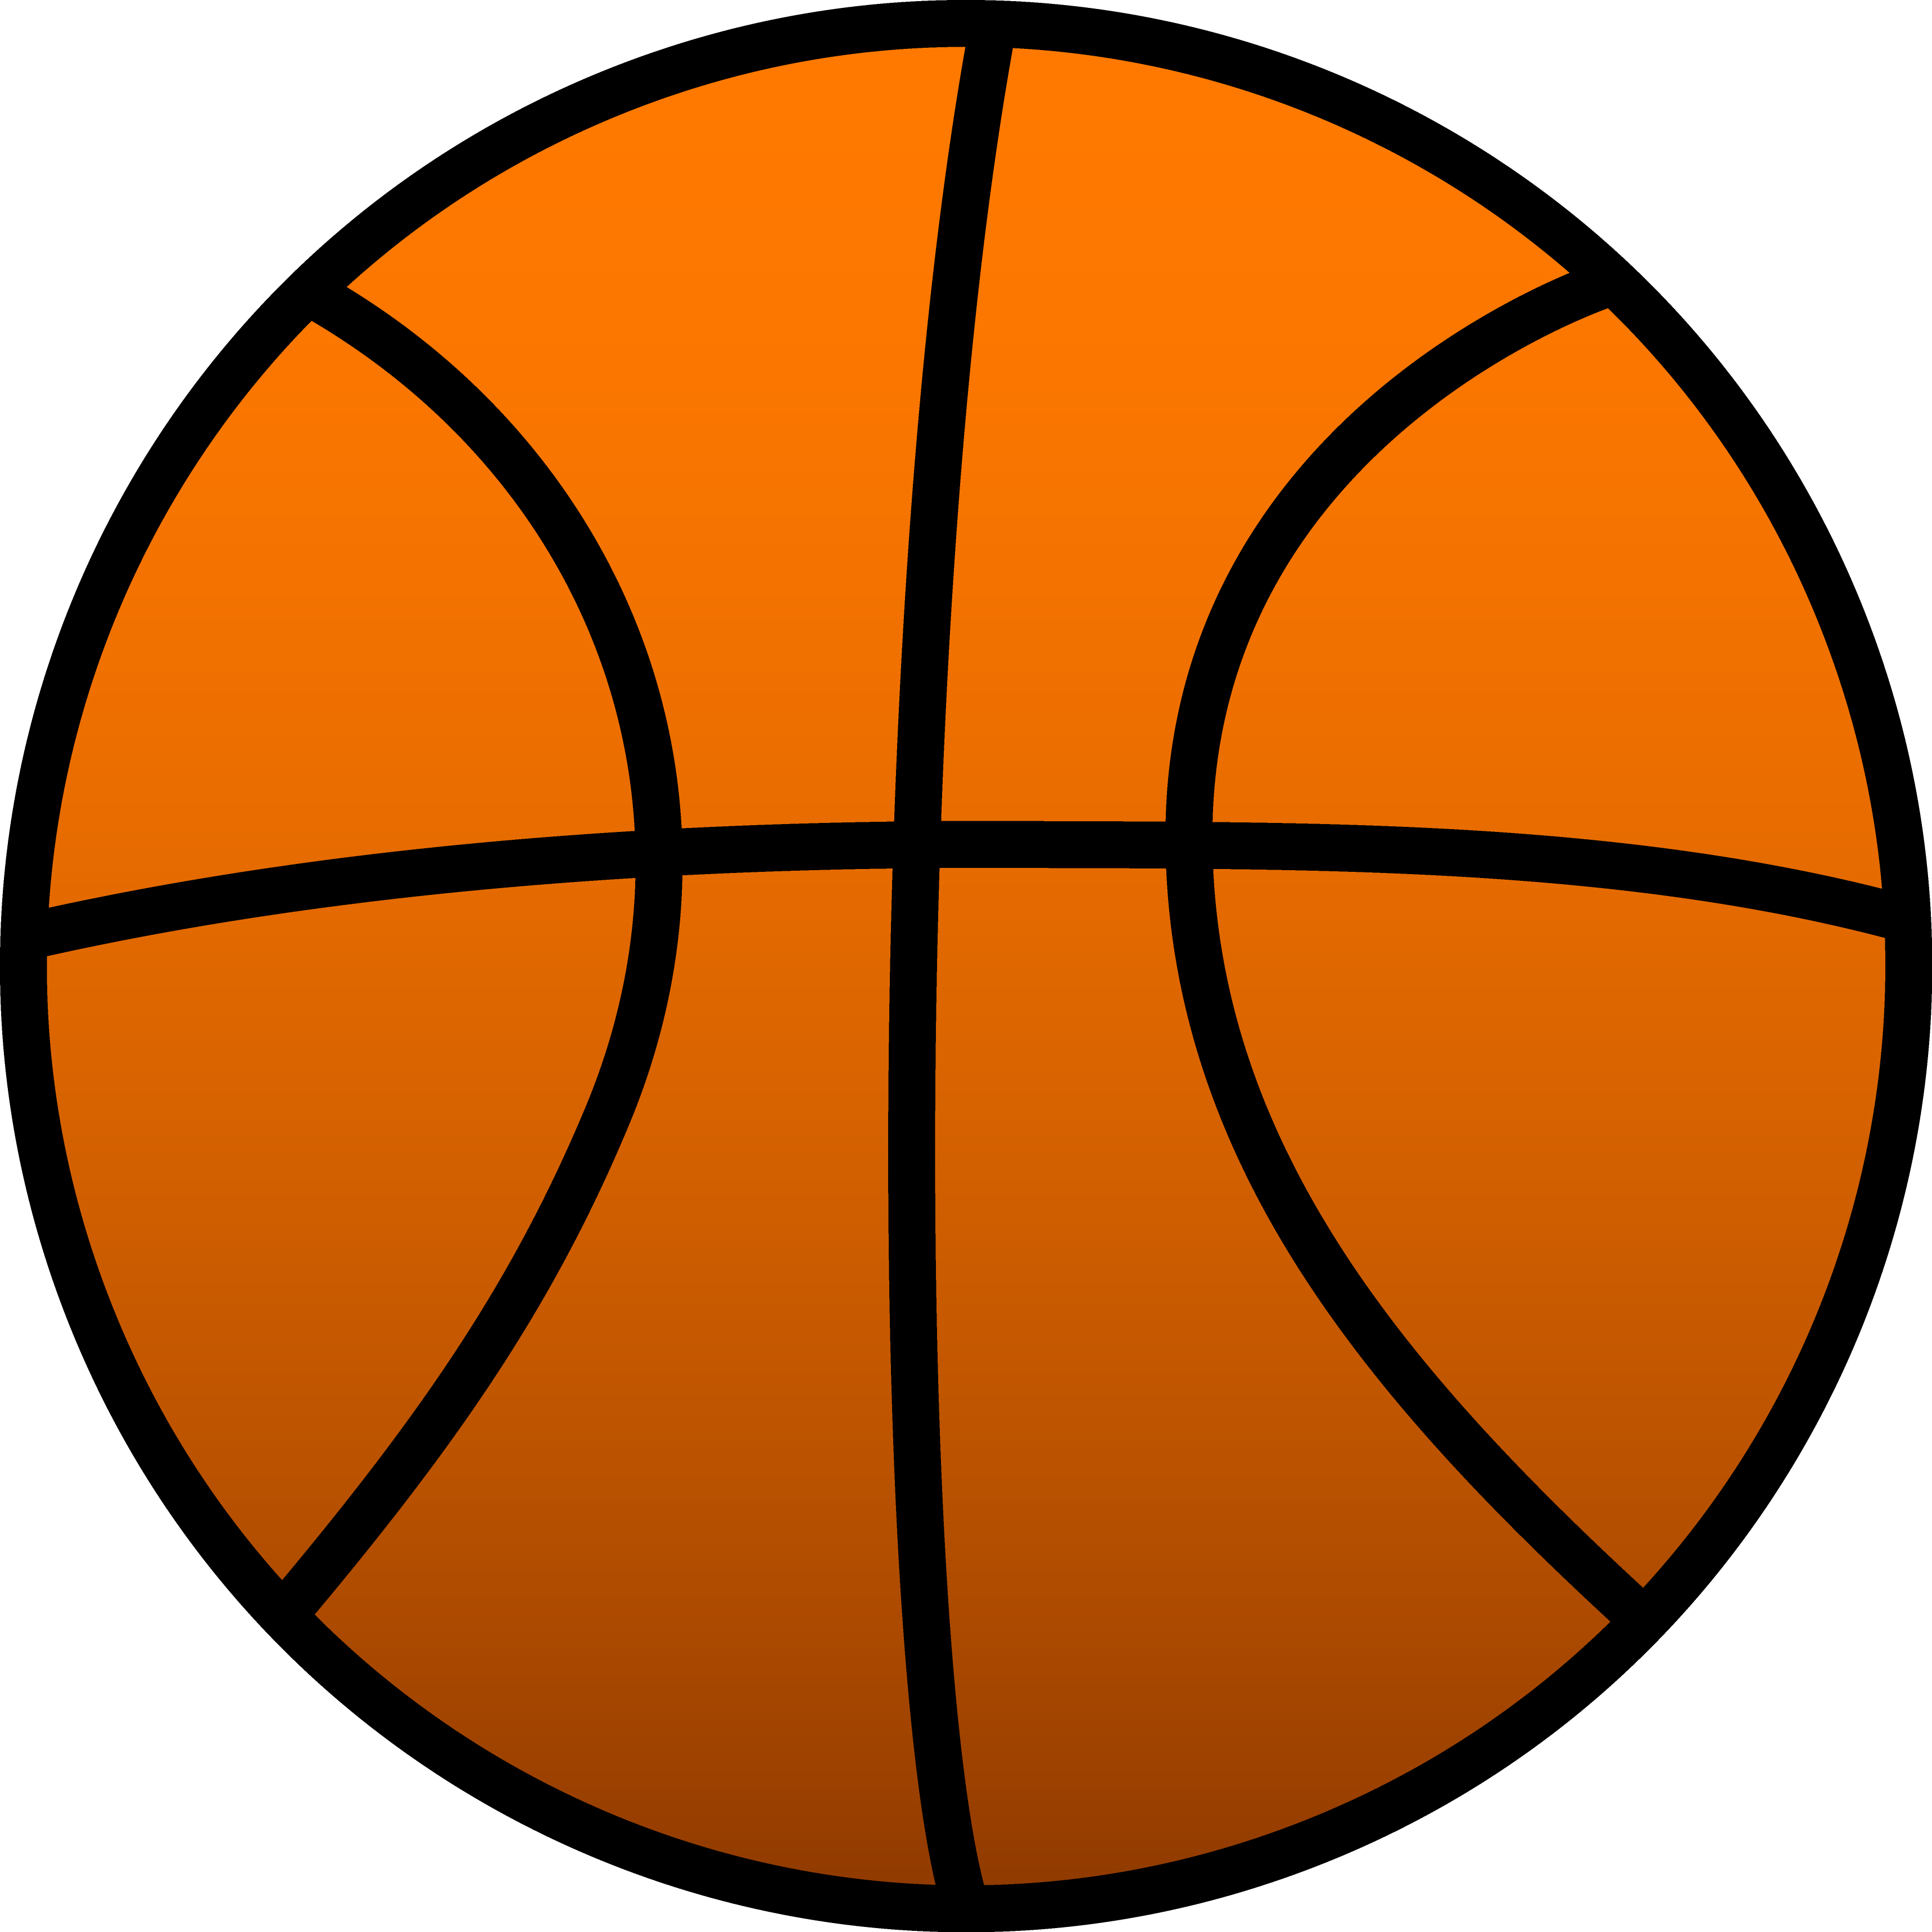 Sports Balls Clipart | Clipart library - Free Clipart Images